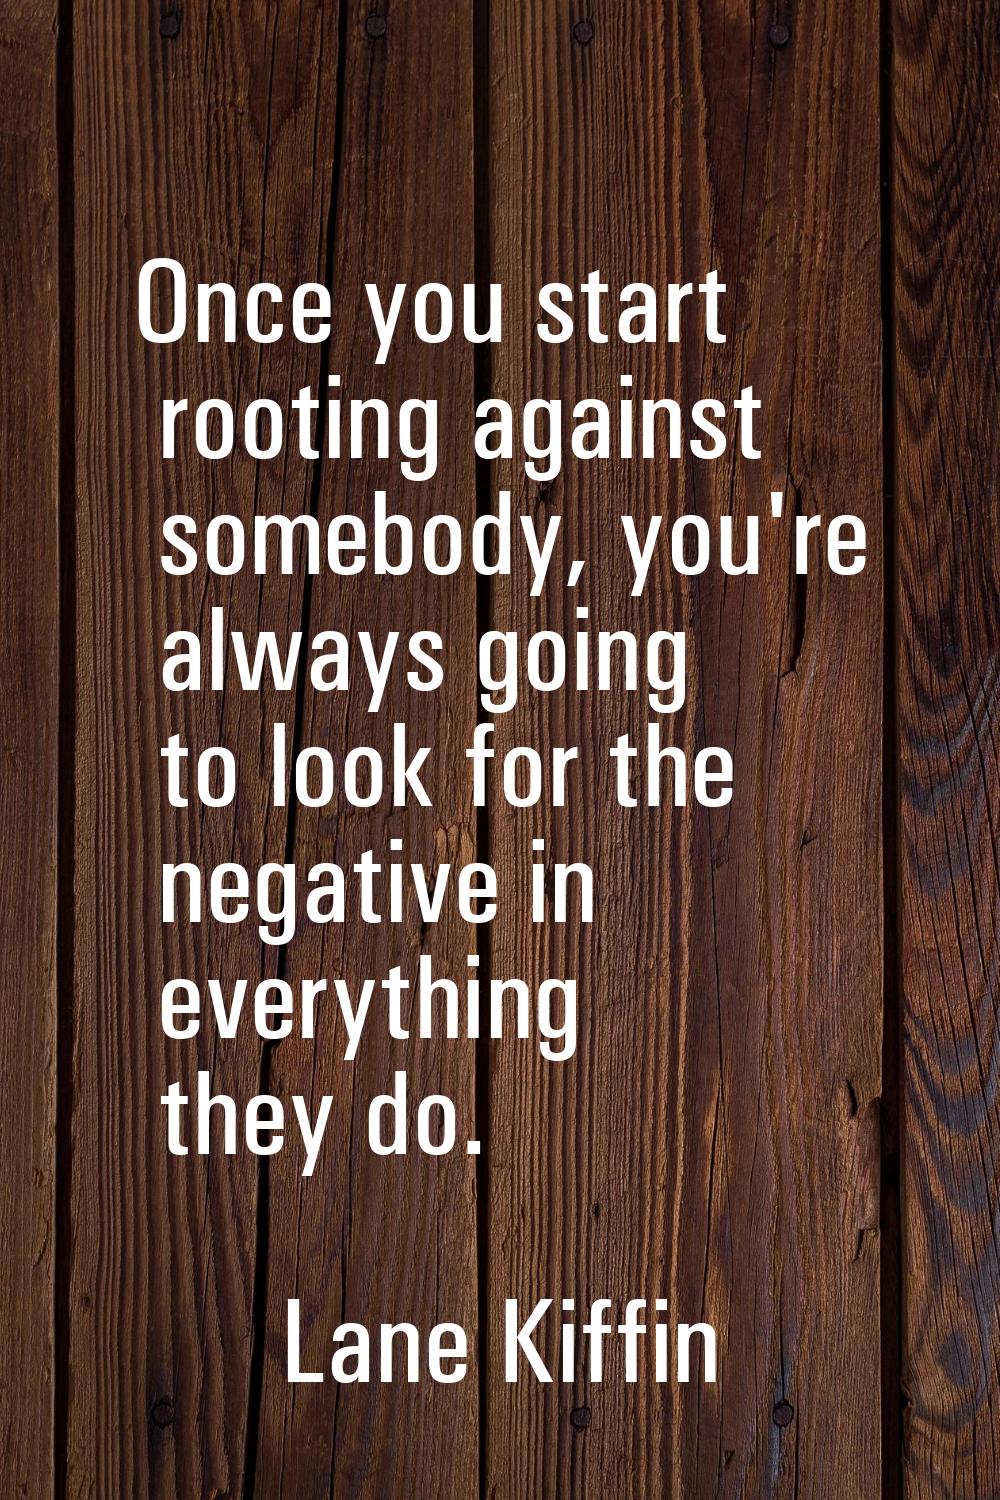 Once you start rooting against somebody, you're always going to look for the negative in everything